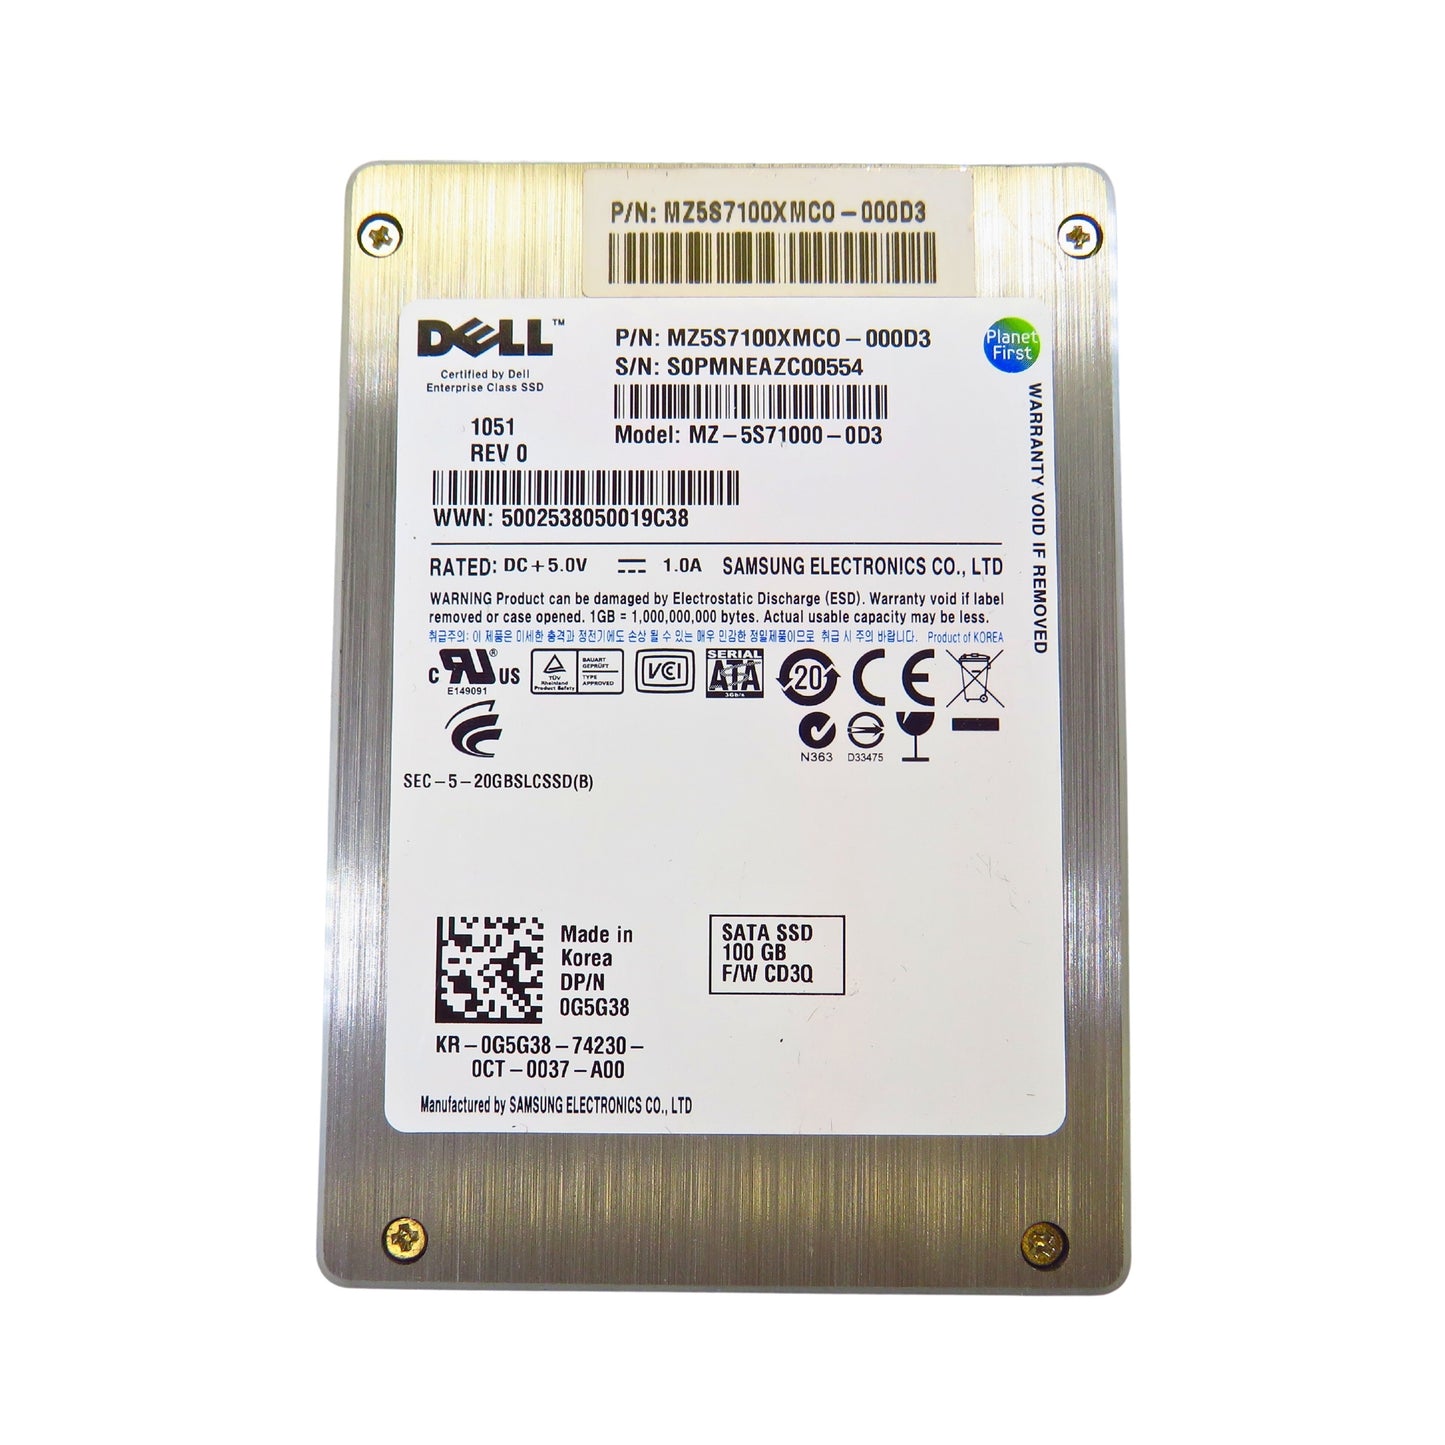 Dell G5G38 100GB 2.5" SATA 3Gbps SSD Solid State Drive (Refurbished)